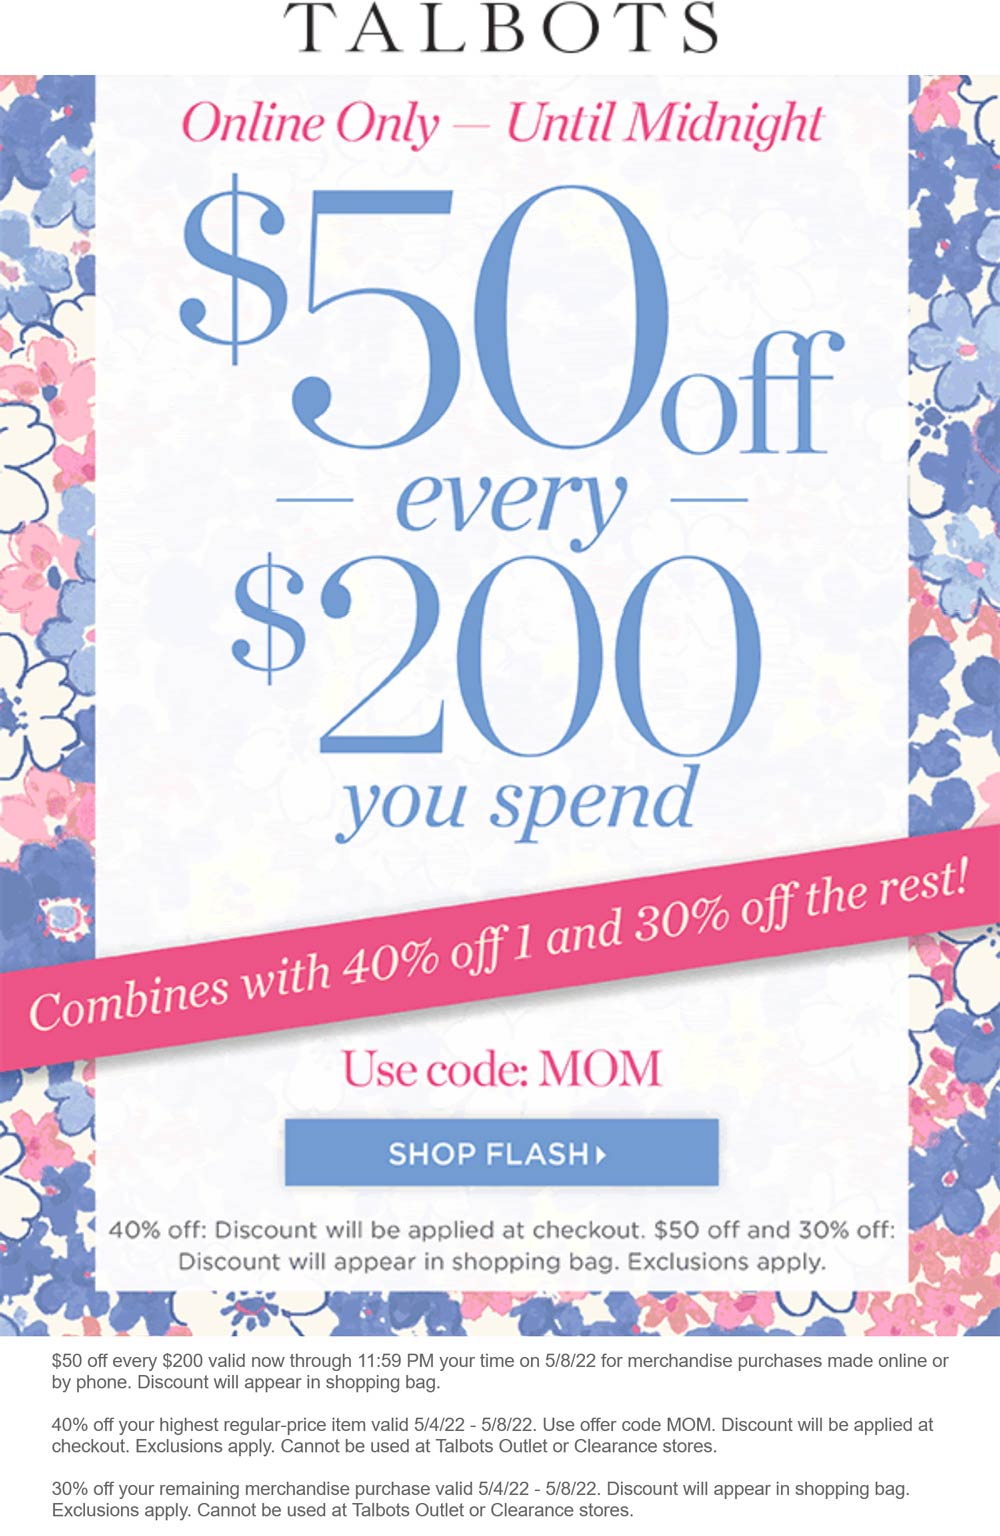 Talbots stores Coupon  $50 off every $200 online today at Talbots via promo code MOM #talbots 